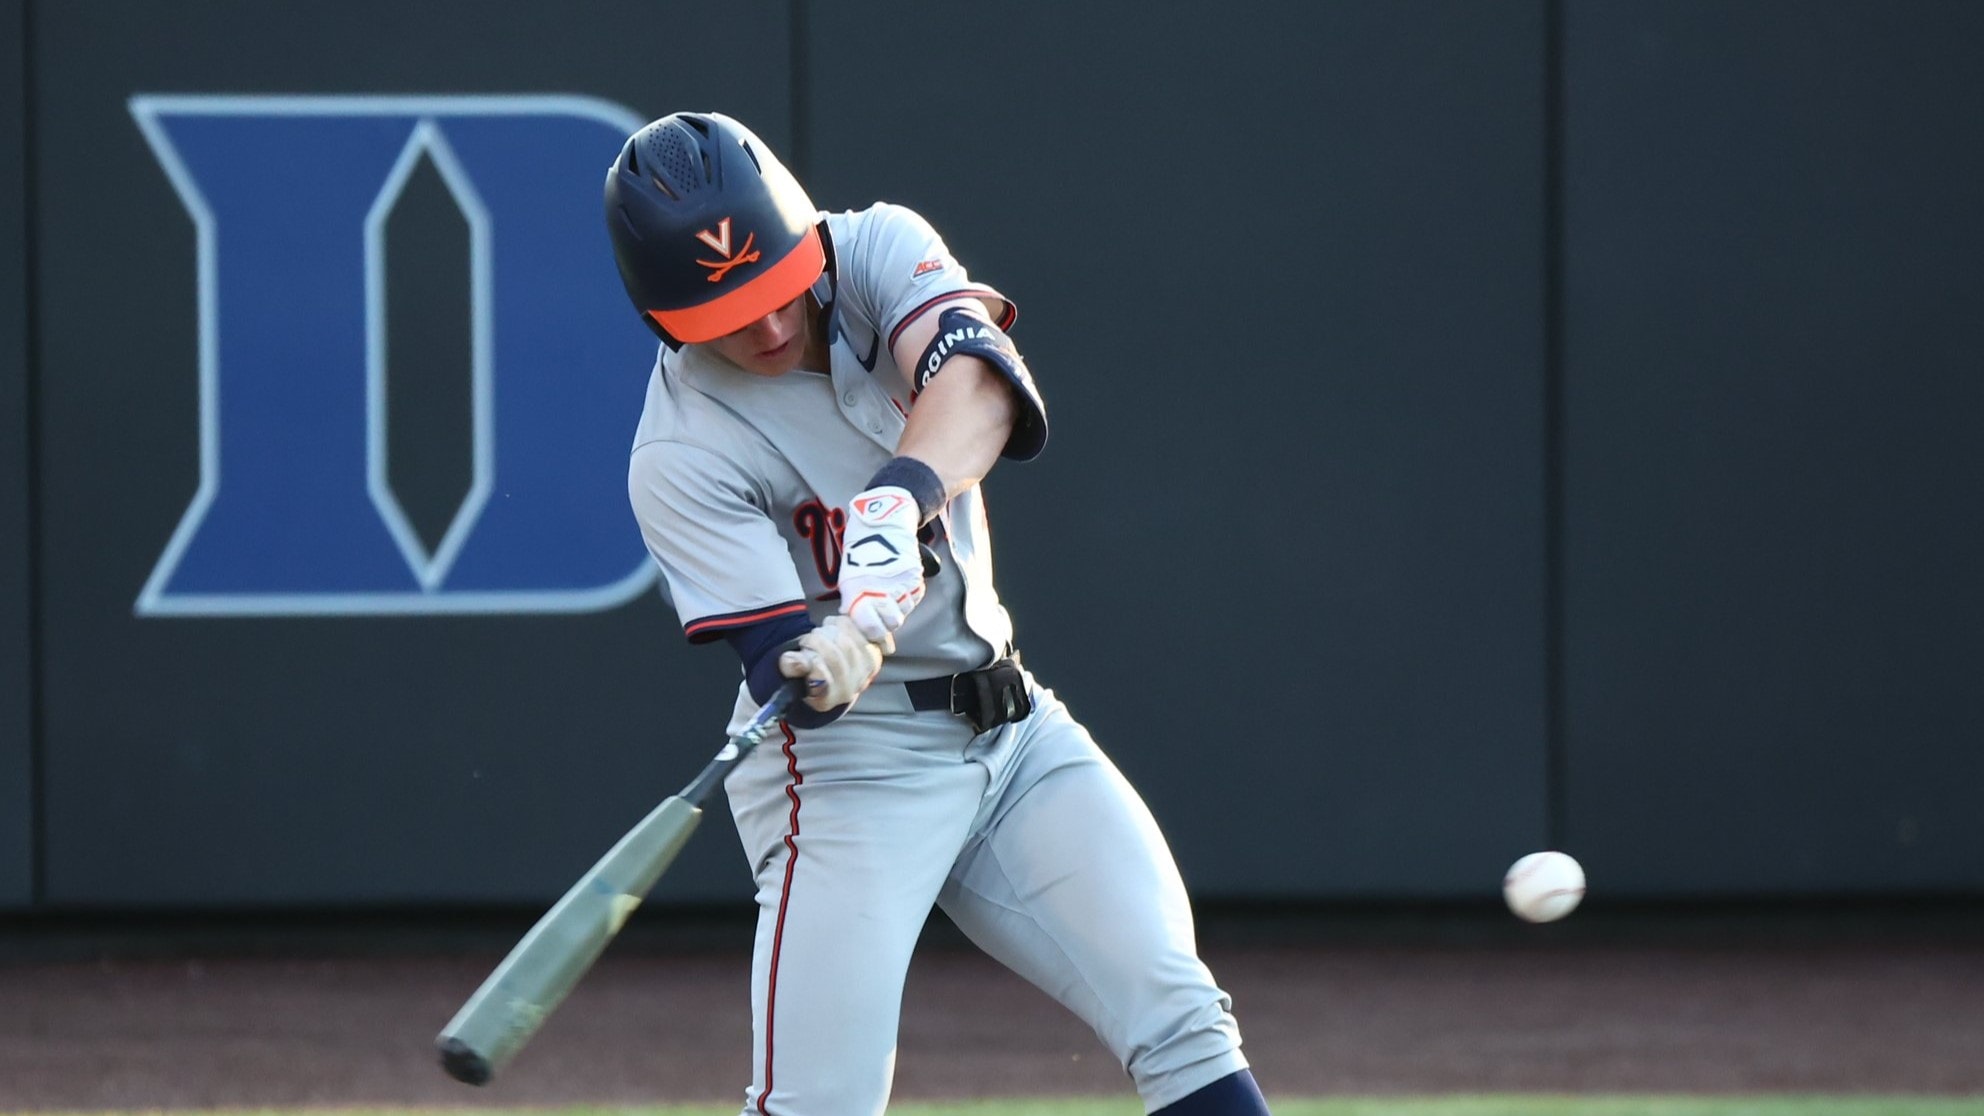 Griff O'Ferrall swings at a pitch during the Virginia baseball game at Duke.